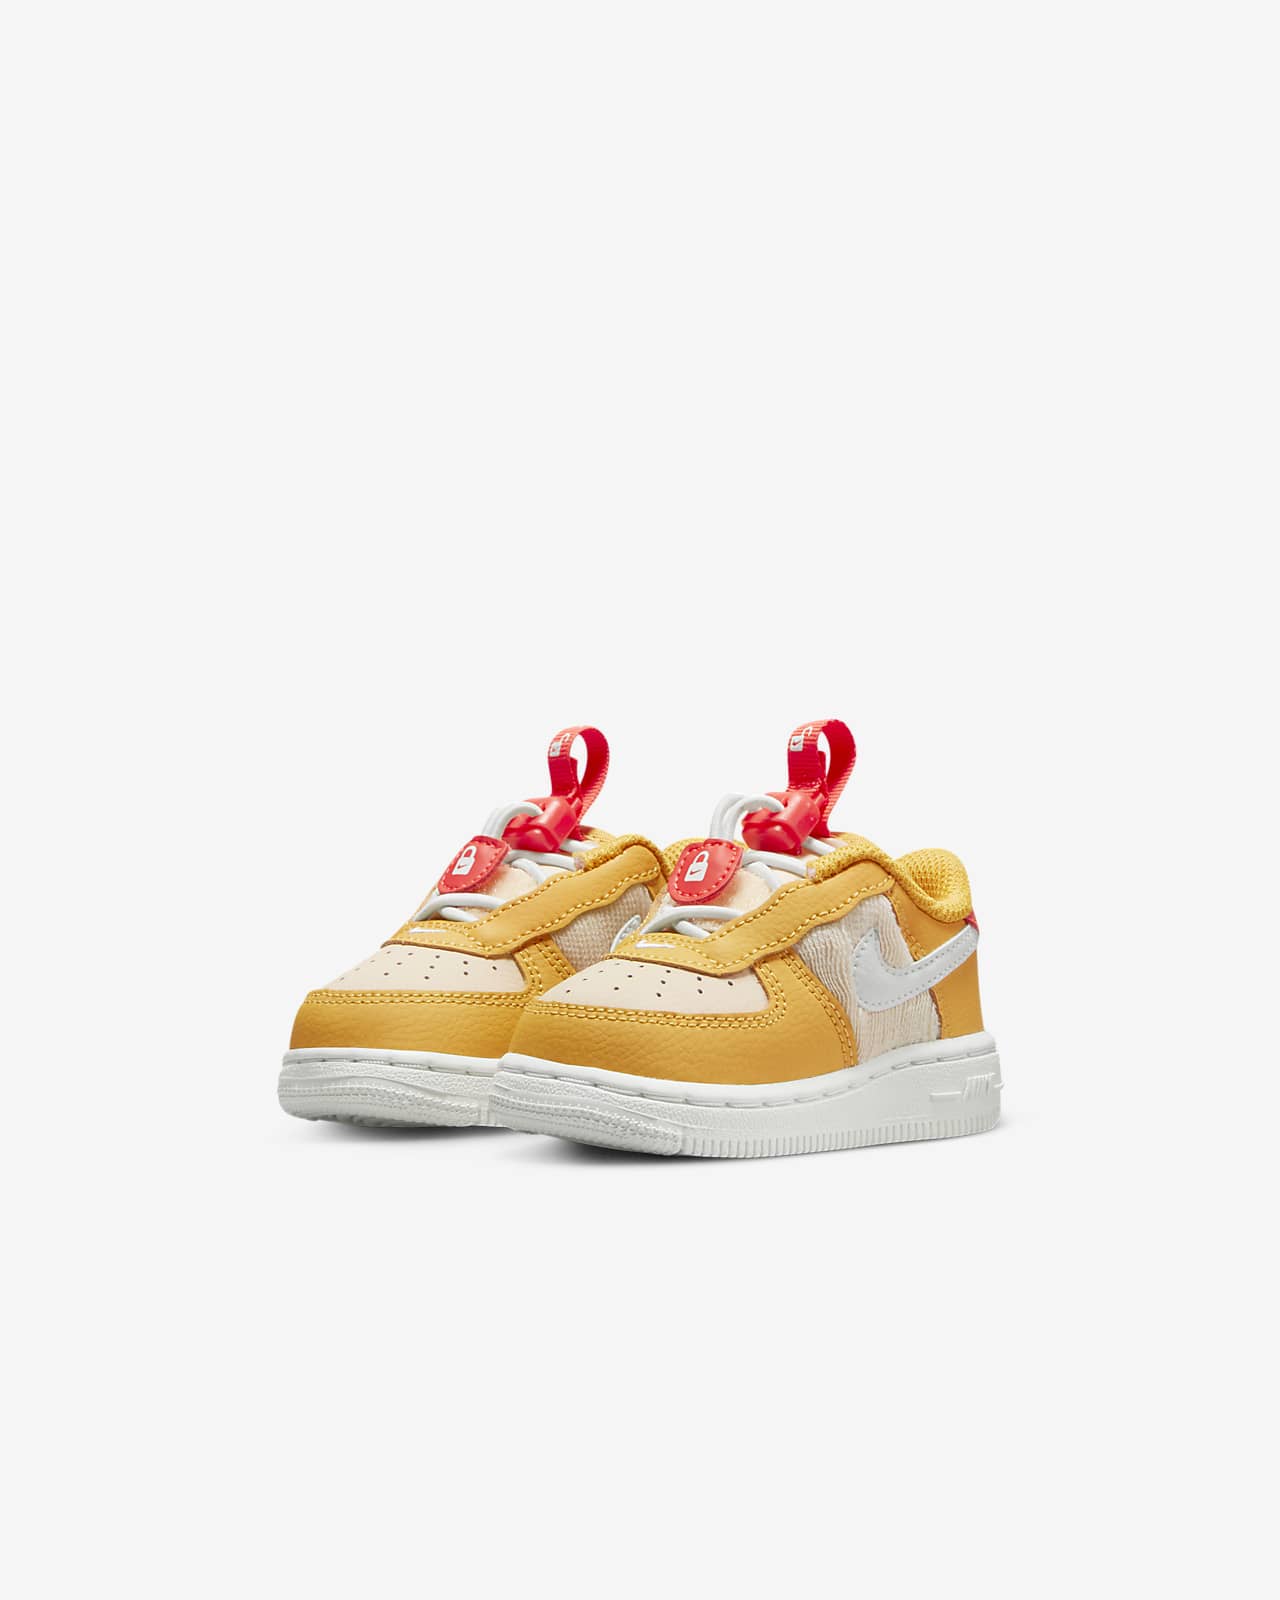 Nike Force 1 Toggle SE Baby/Toddler Shoes